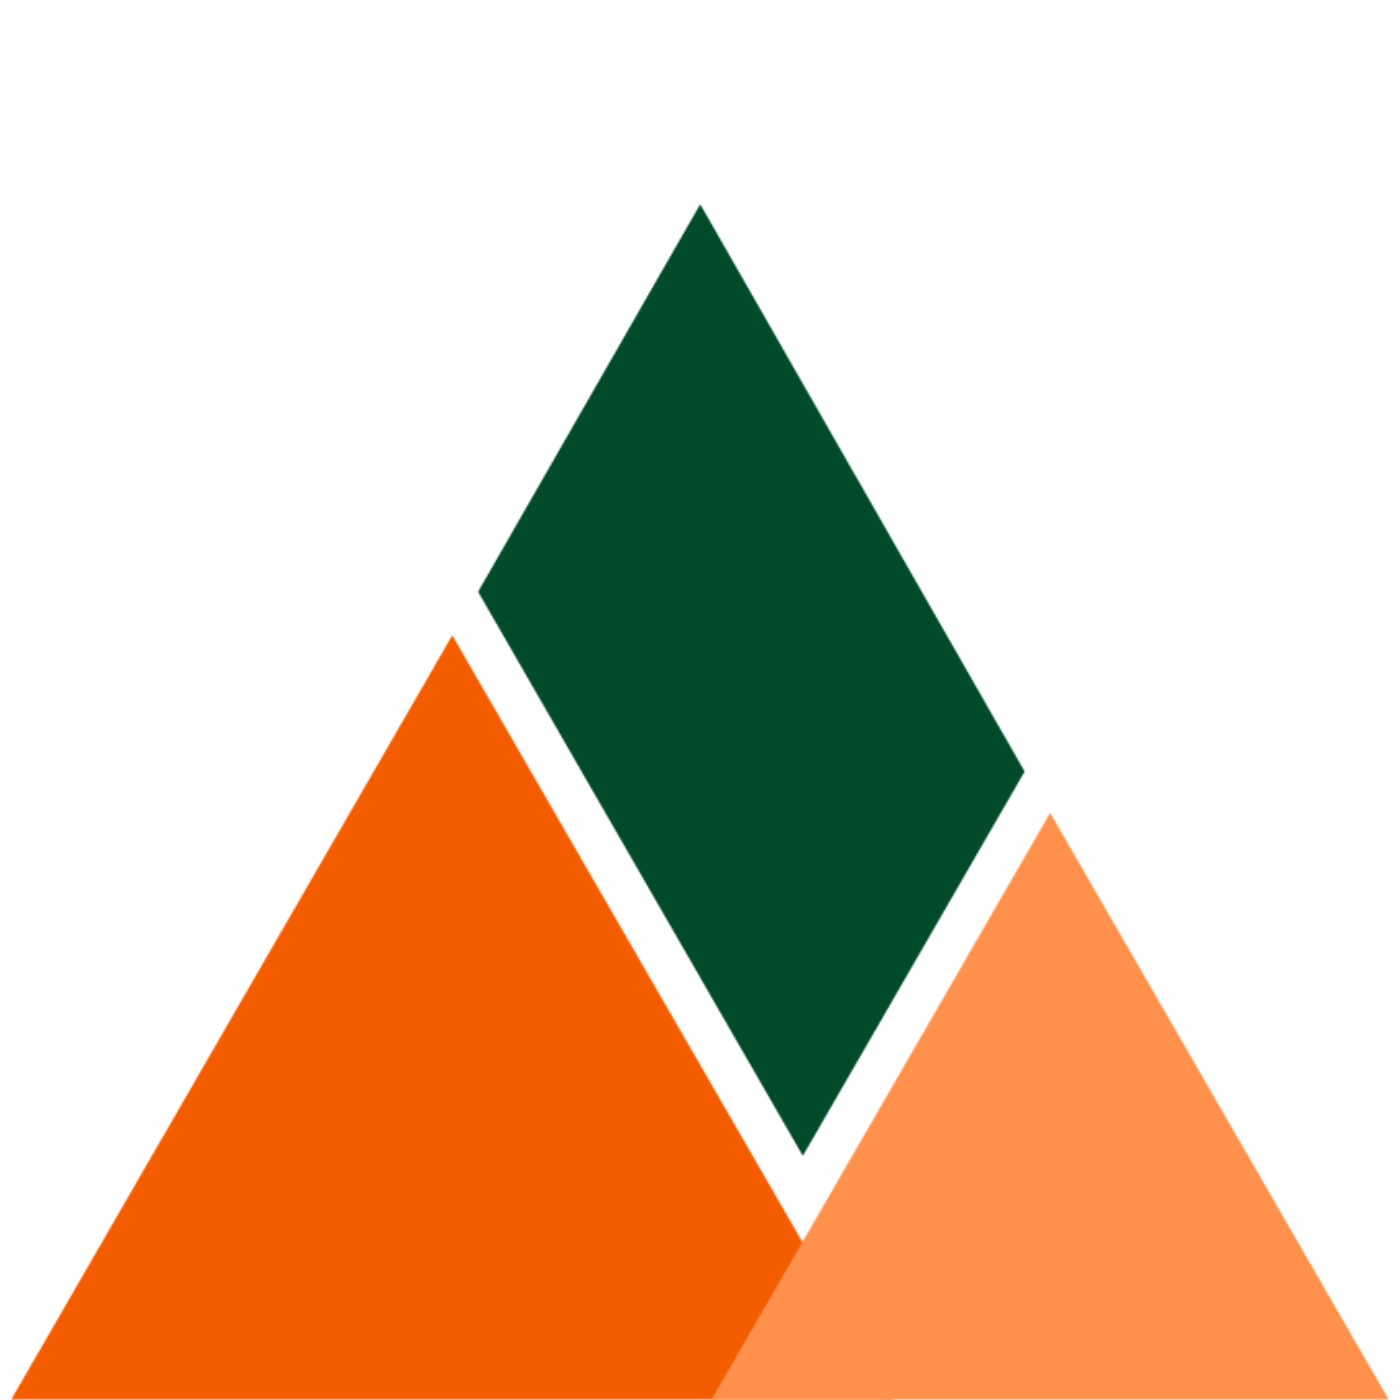 A triangle with three triangles inside, green and two different shades of orange. Between the triangles is white space in a reverse tick shape